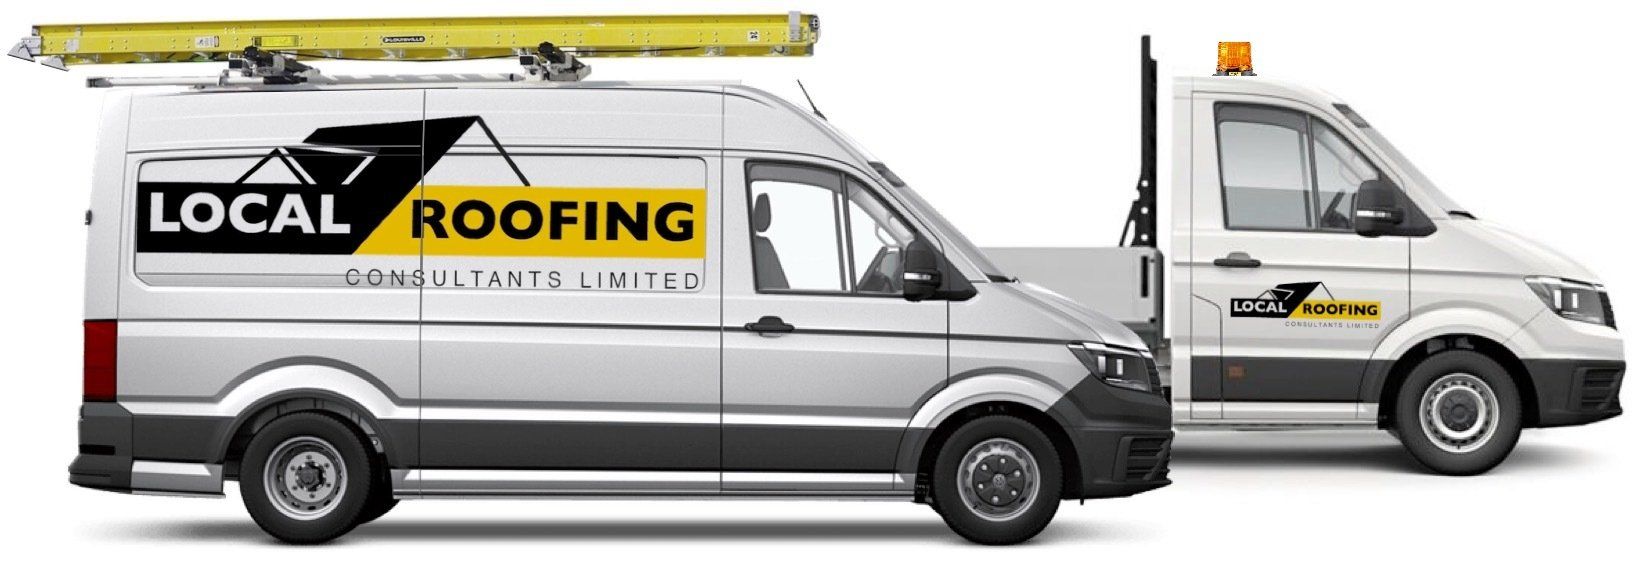 Local Roofing Consultants Limited work in Golders Green and throughout the London area